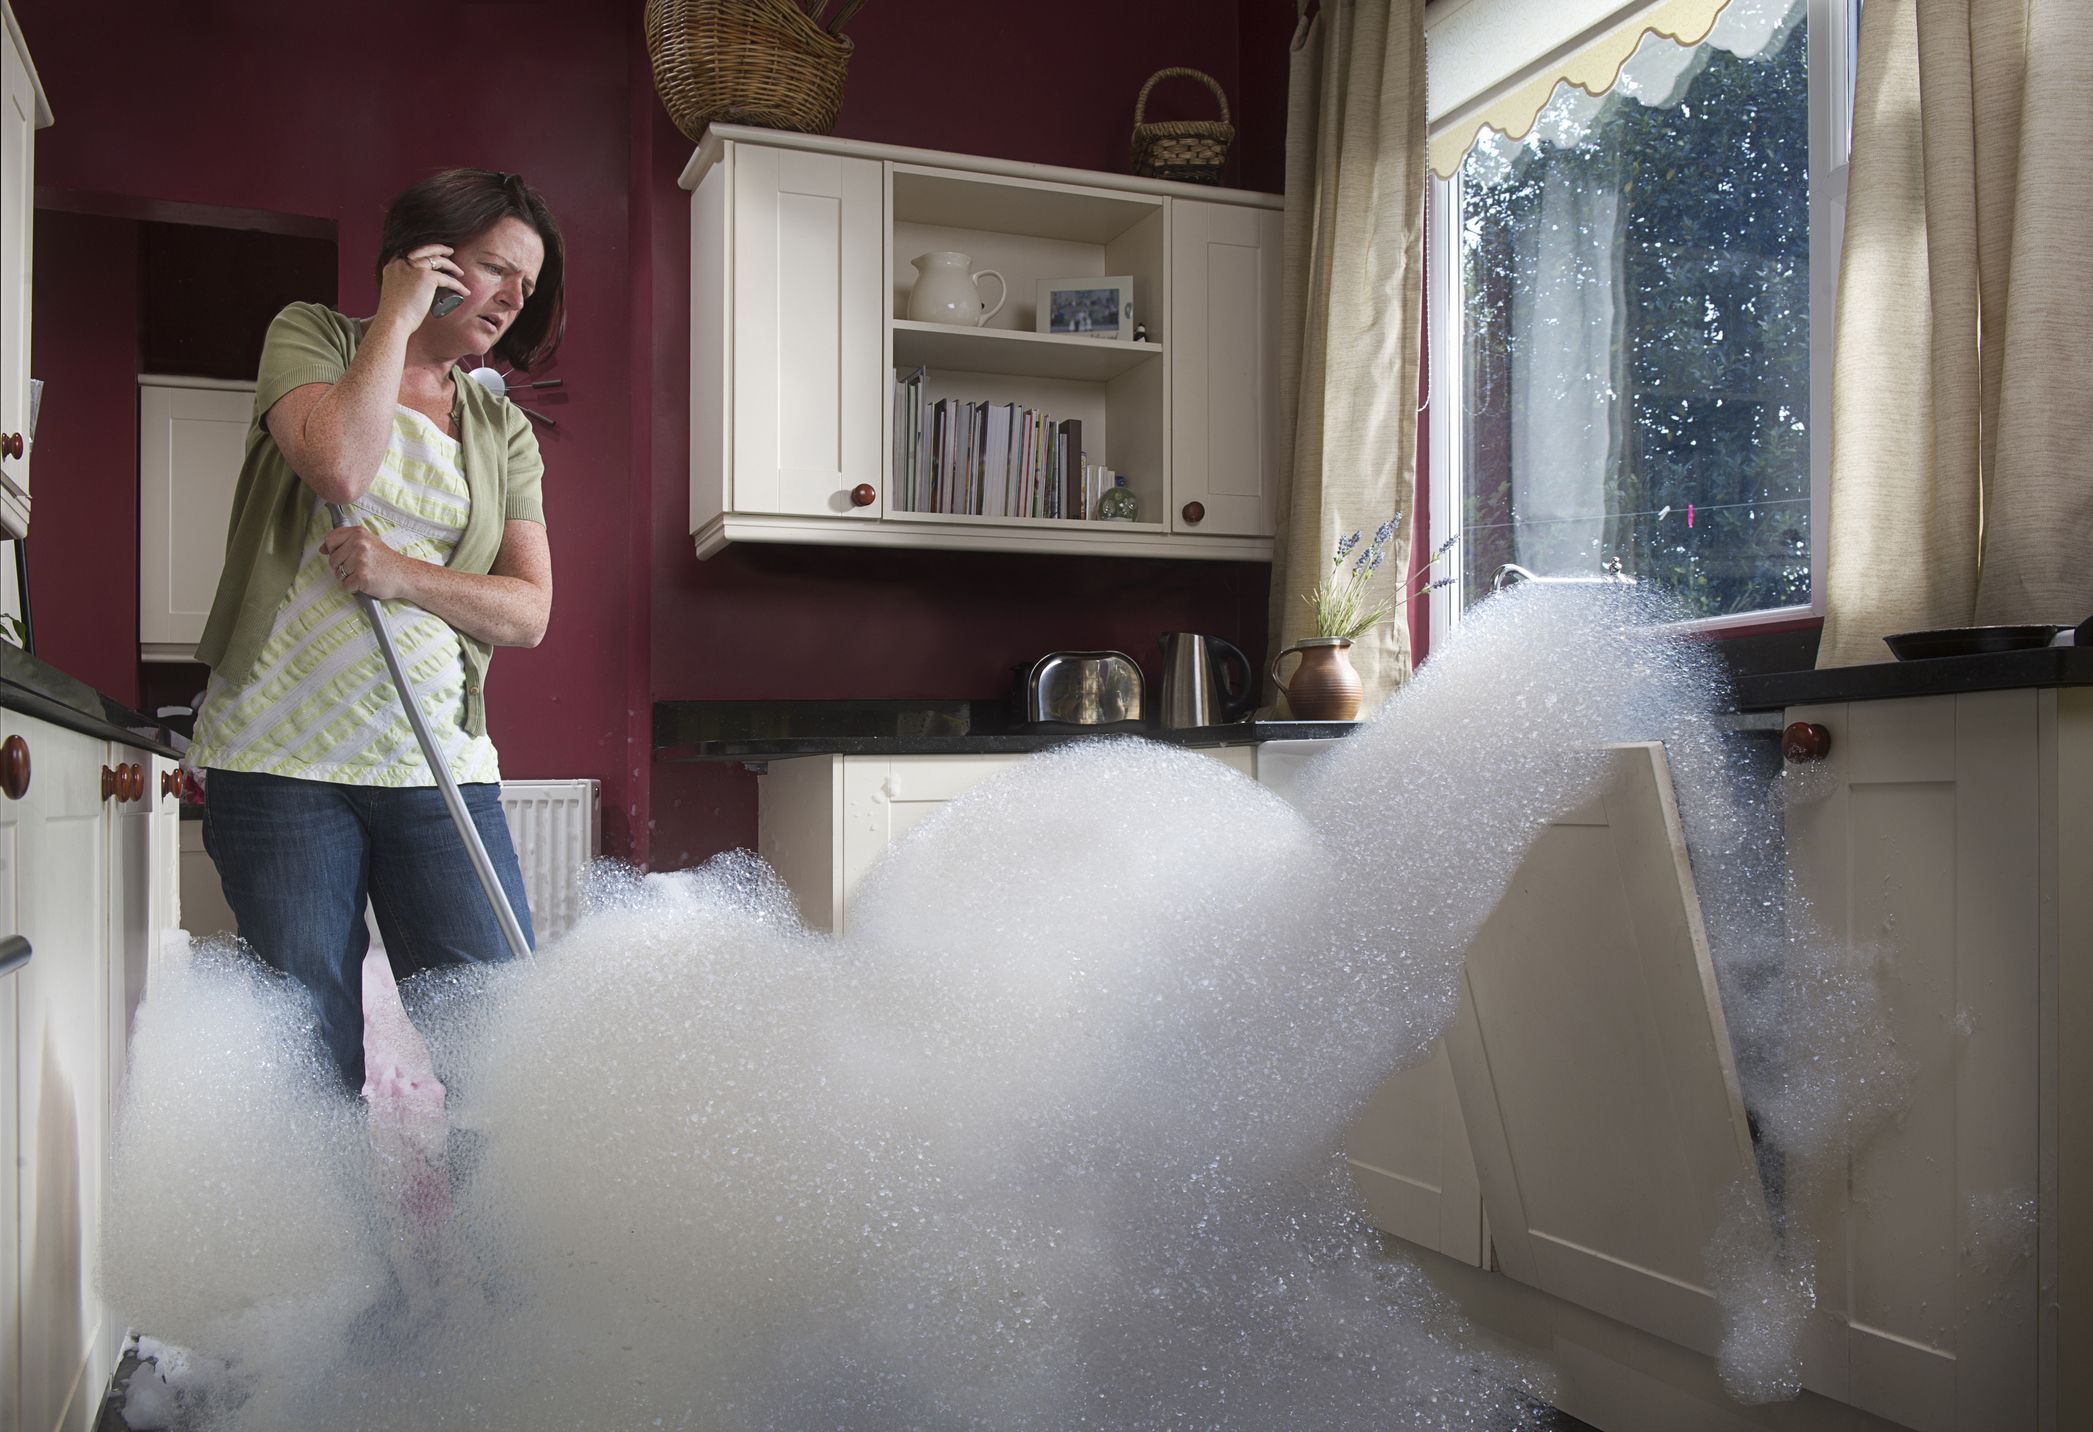 Woman mopping up a kitchen flood; resilience helps ease life's curveballs and challenges